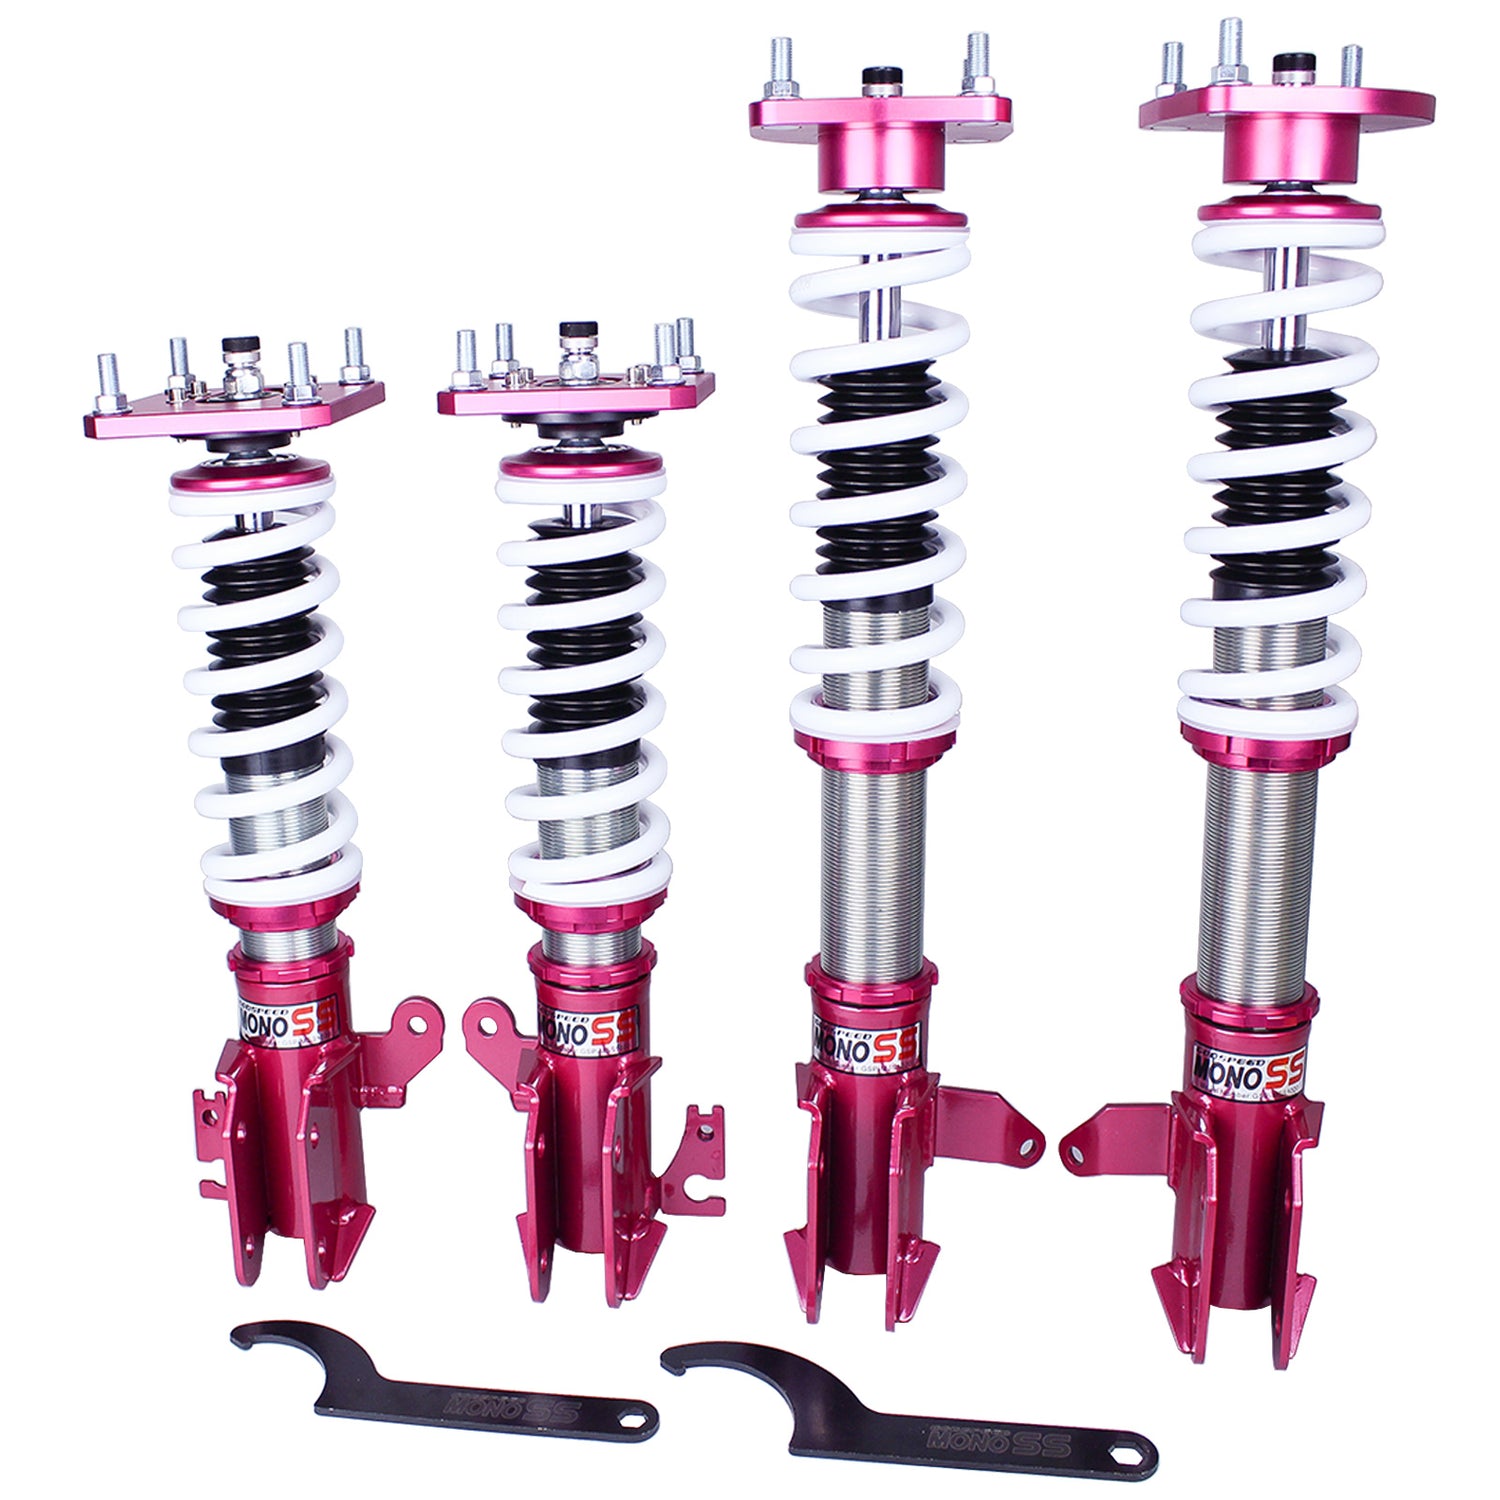 Godspeed MSS1020-B MonoSS Coilover Lowering Kit, Fully Adjustable, Ride Height, Spring Tension And 16 Click Damping, Mazda Protege 5(BJ) 2001-04